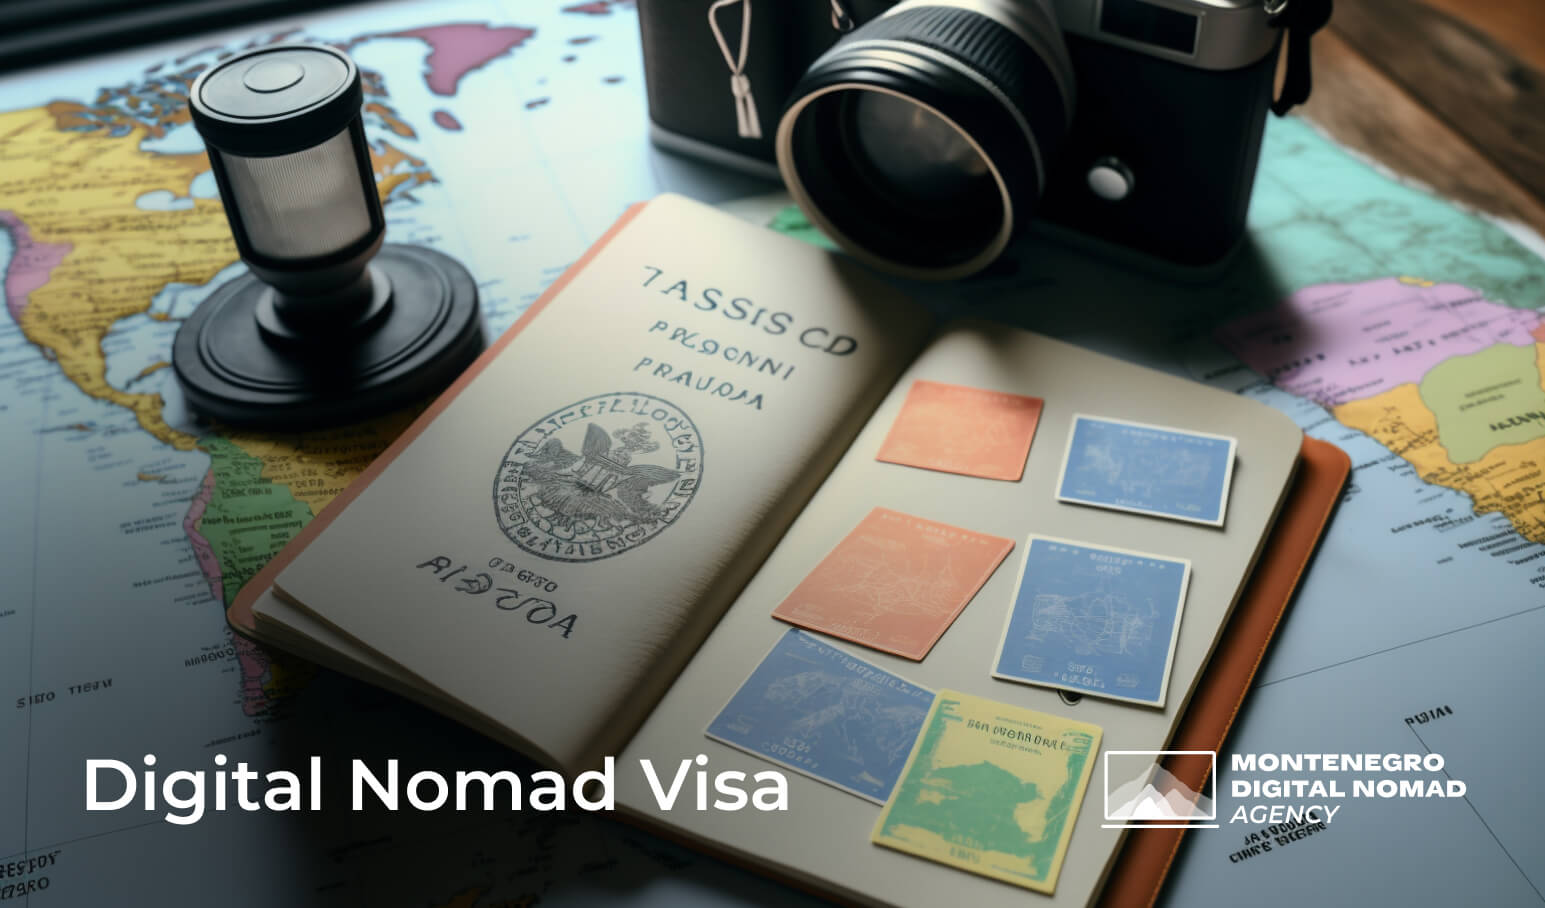 An image of an open passport and a camera on a desk, to imply the subject of Digital Nomad Visas